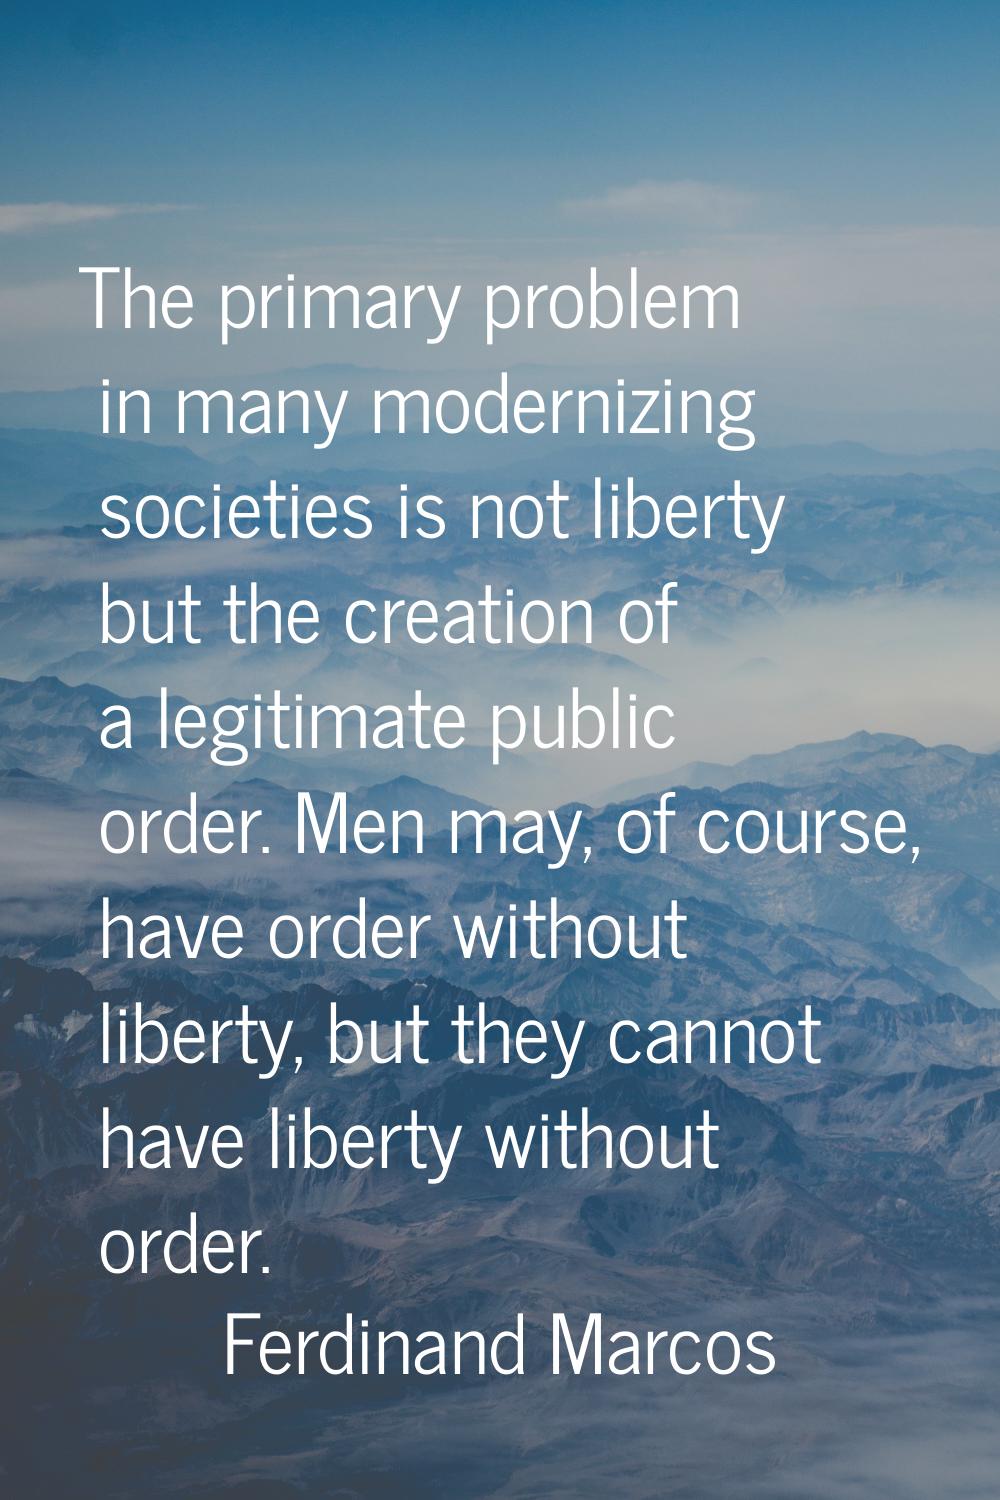 The primary problem in many modernizing societies is not liberty but the creation of a legitimate p